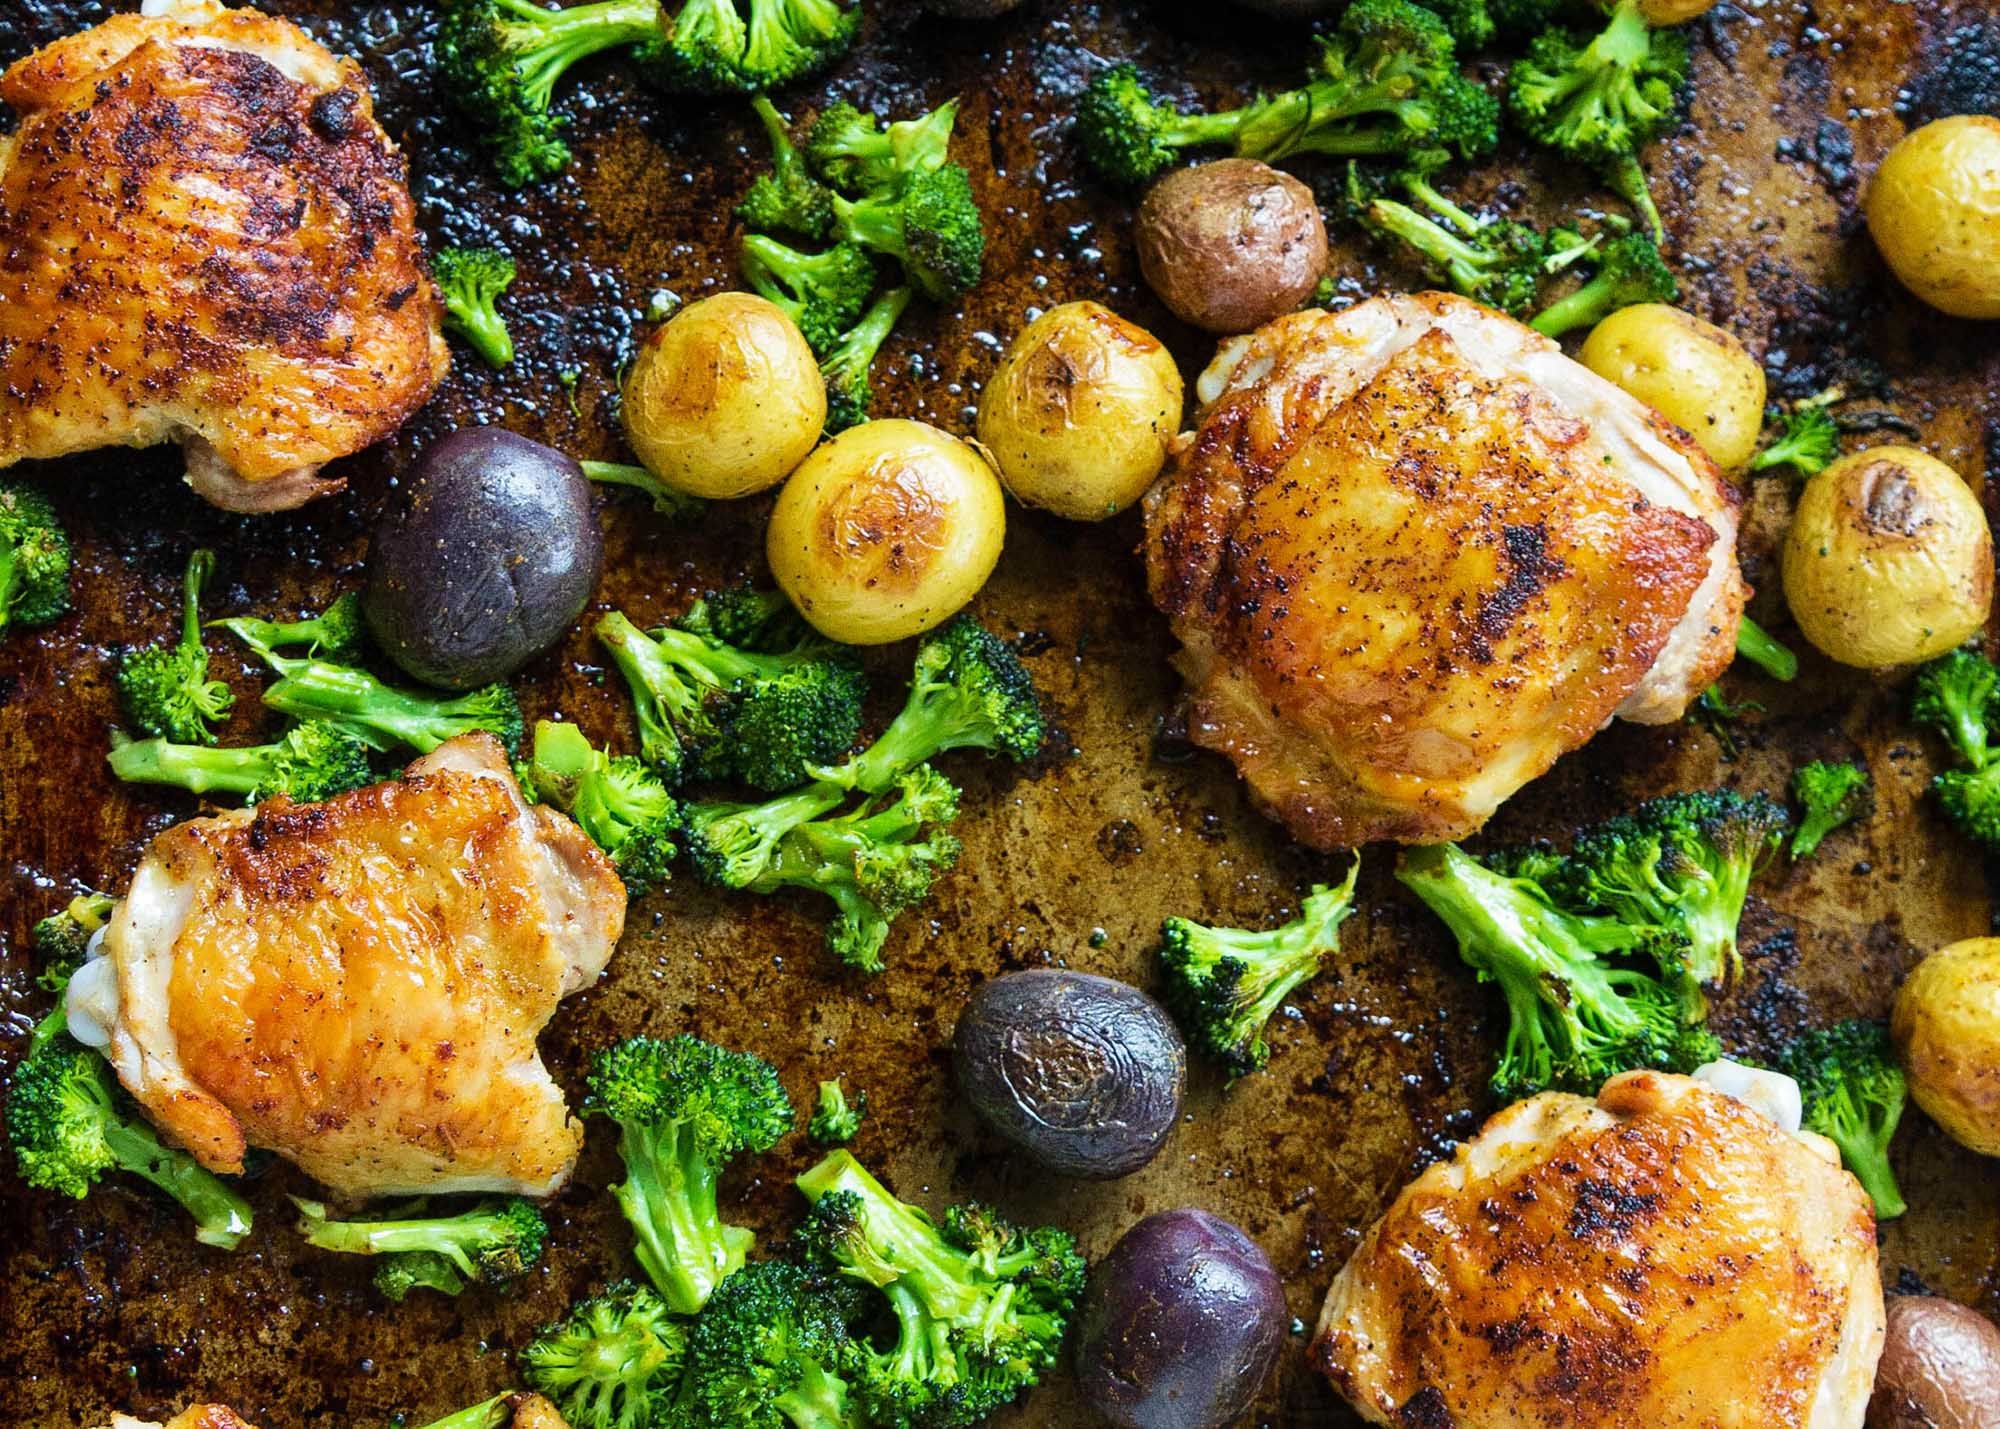 Sheet Pan Chicken with Roasted Broccoli and Potatoes